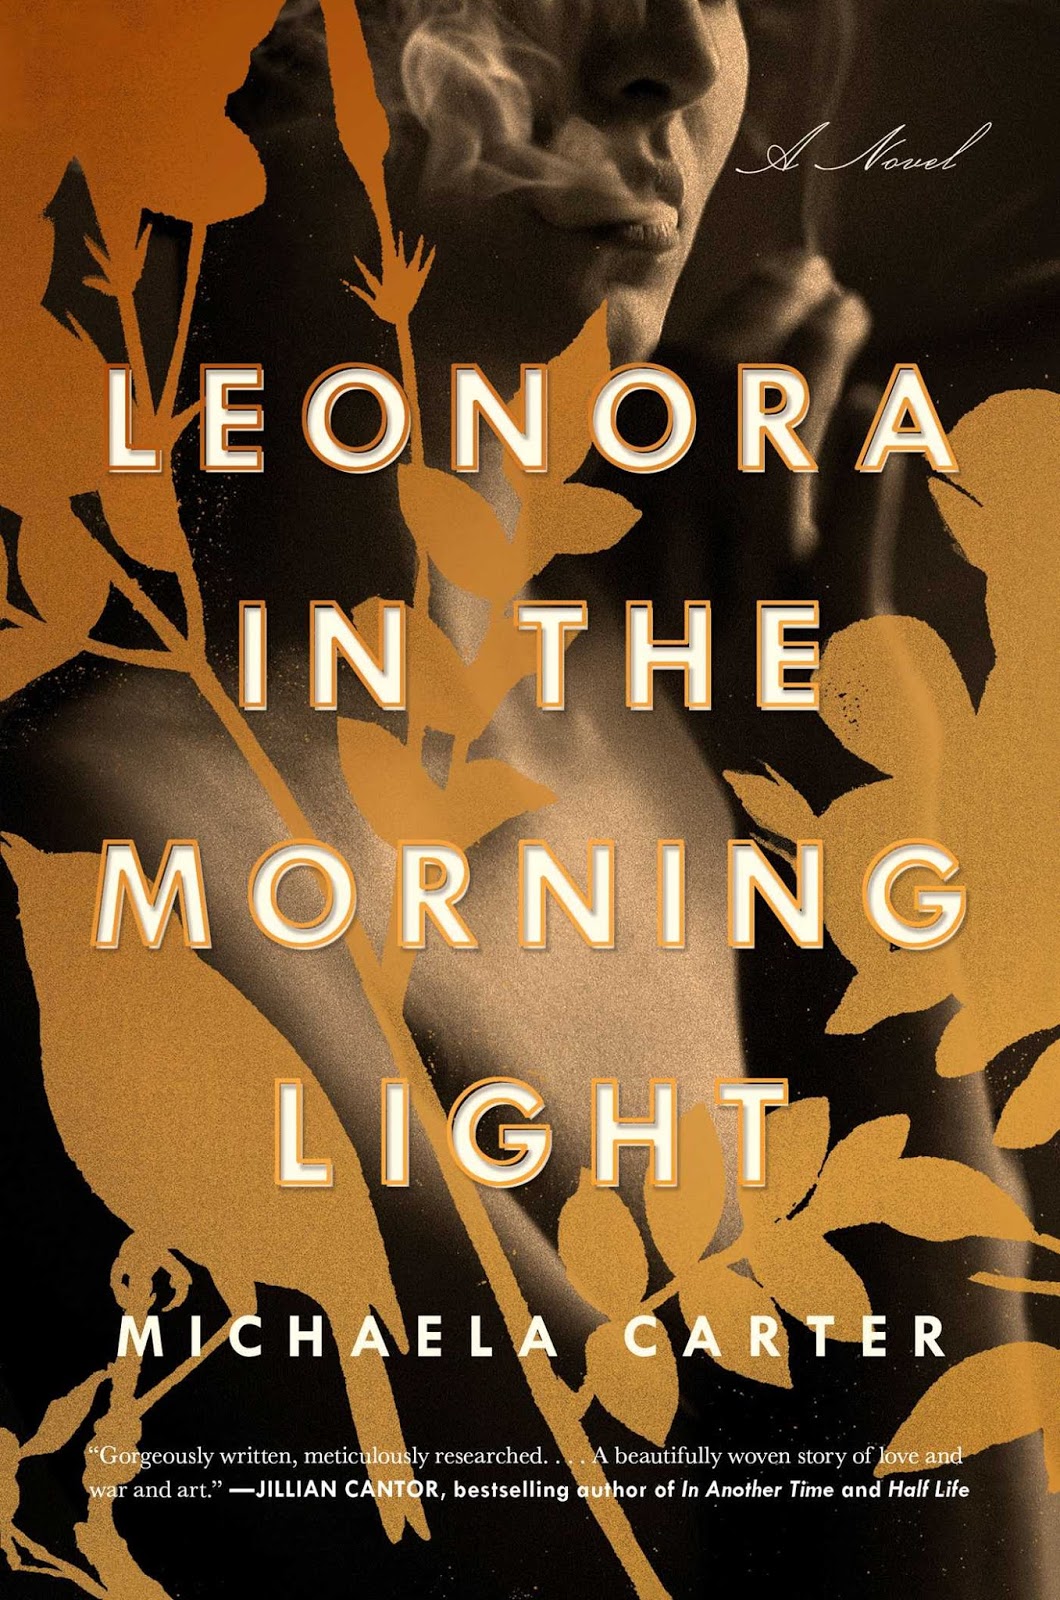 Review: Leonora in the Morning Light by Michaela Carter